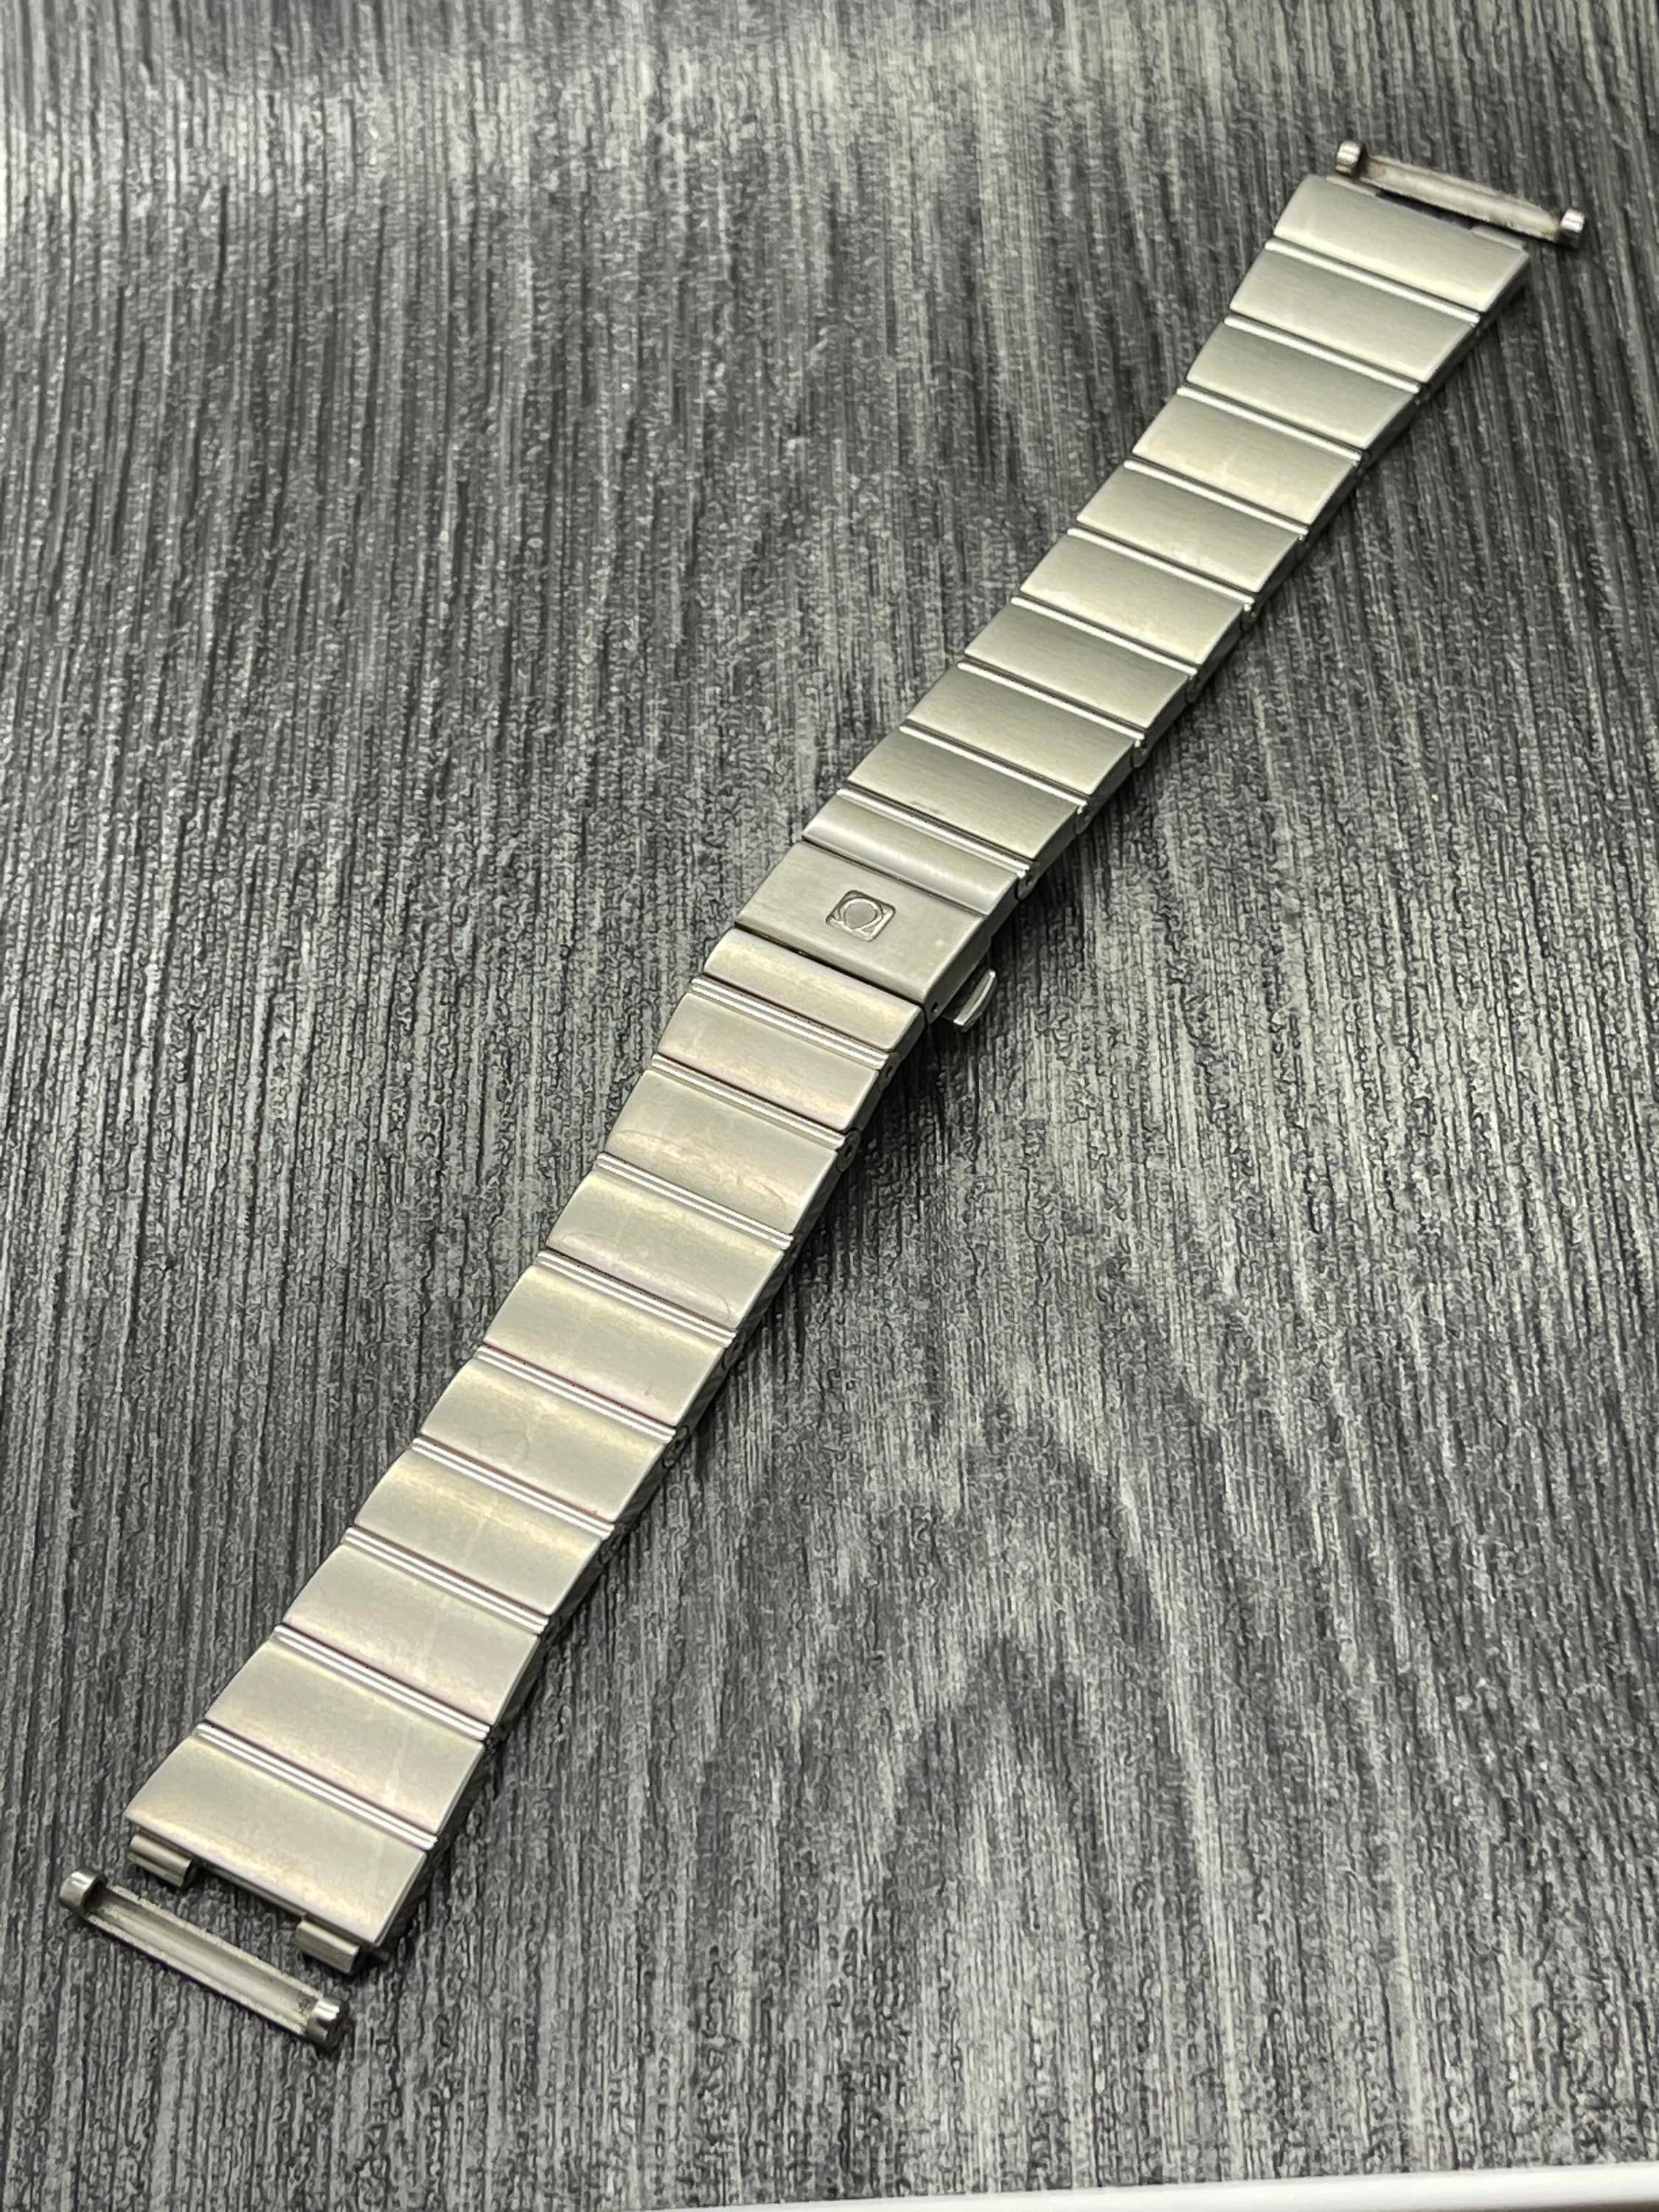 Solid Steel Strap Bracelet Replacement Watch Band For Men039s Omega  Constellation  eBay